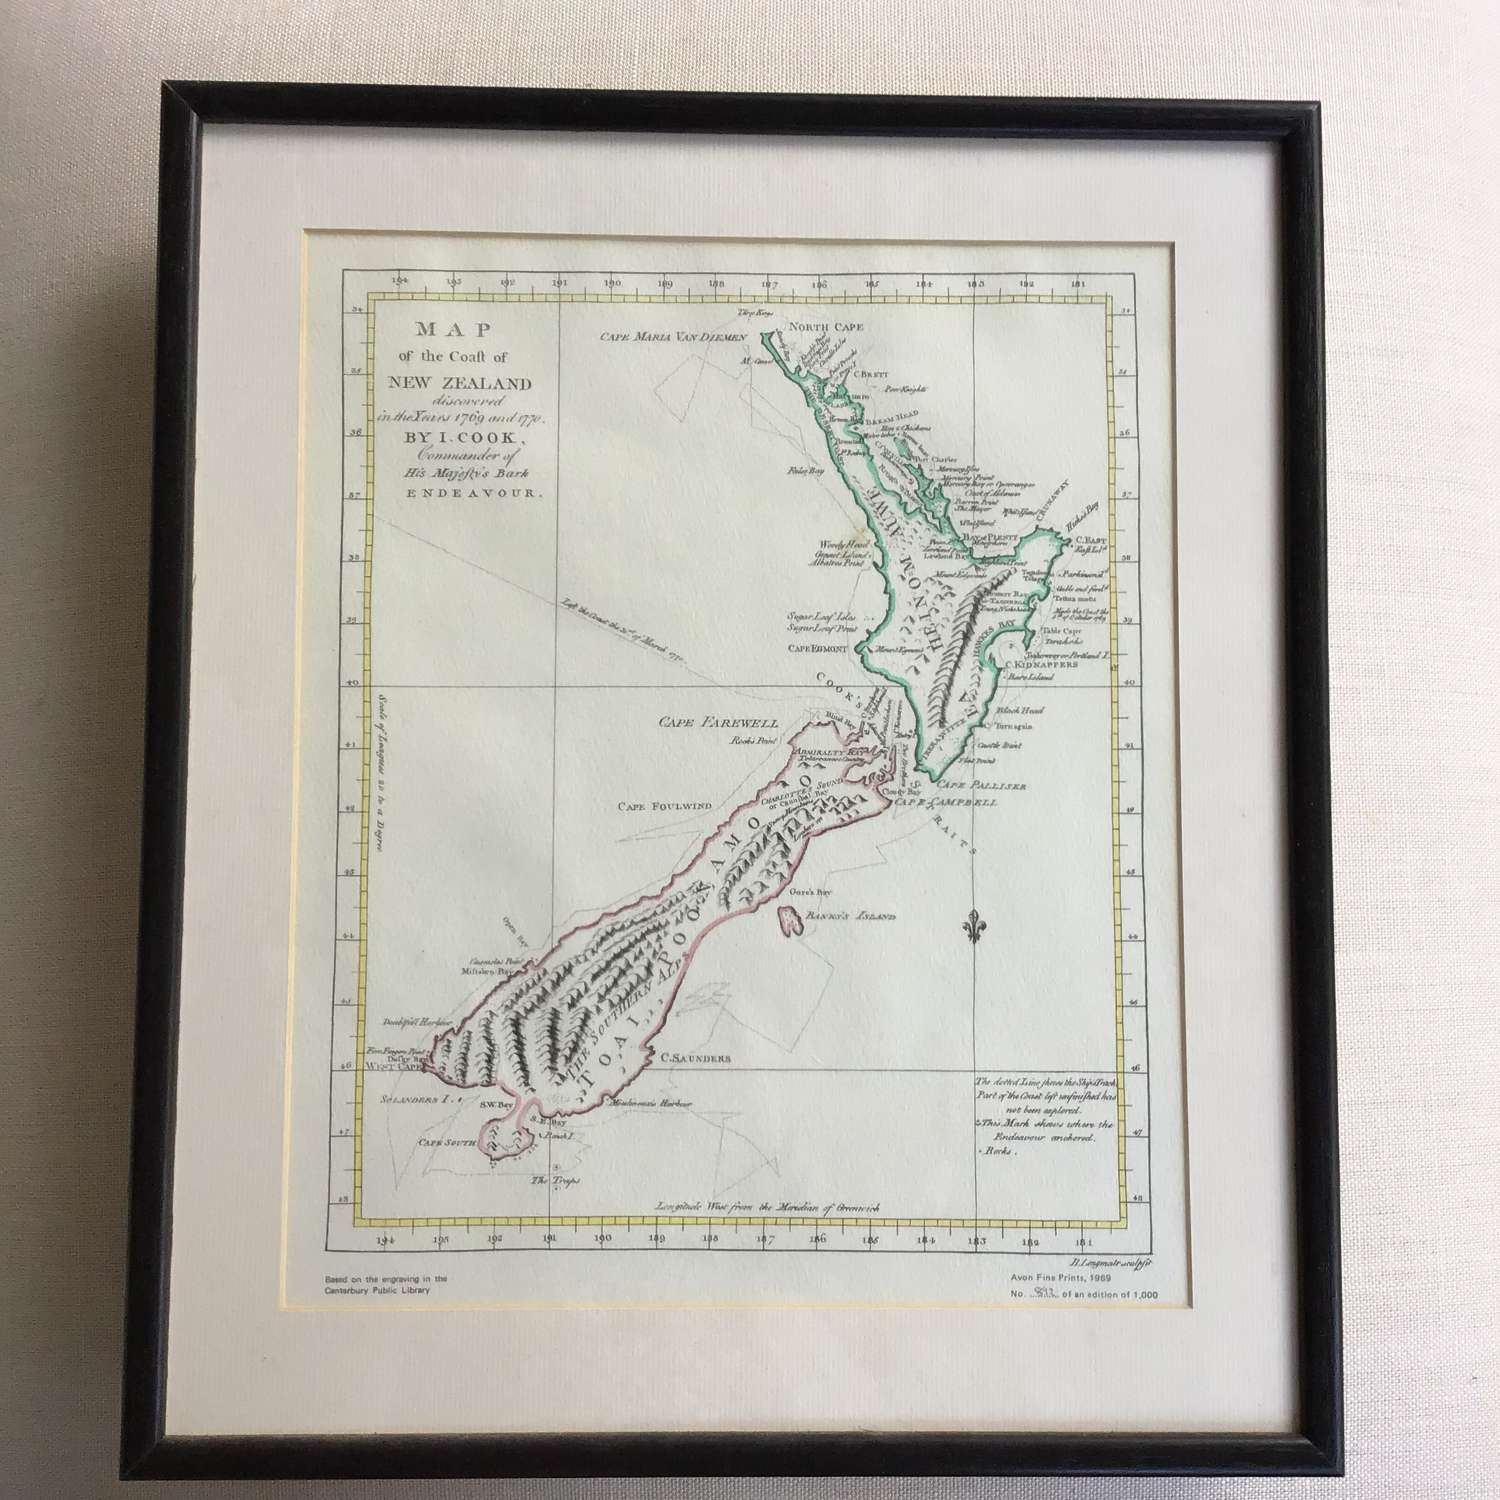 Numbered print of the map of the coast of New Zealand